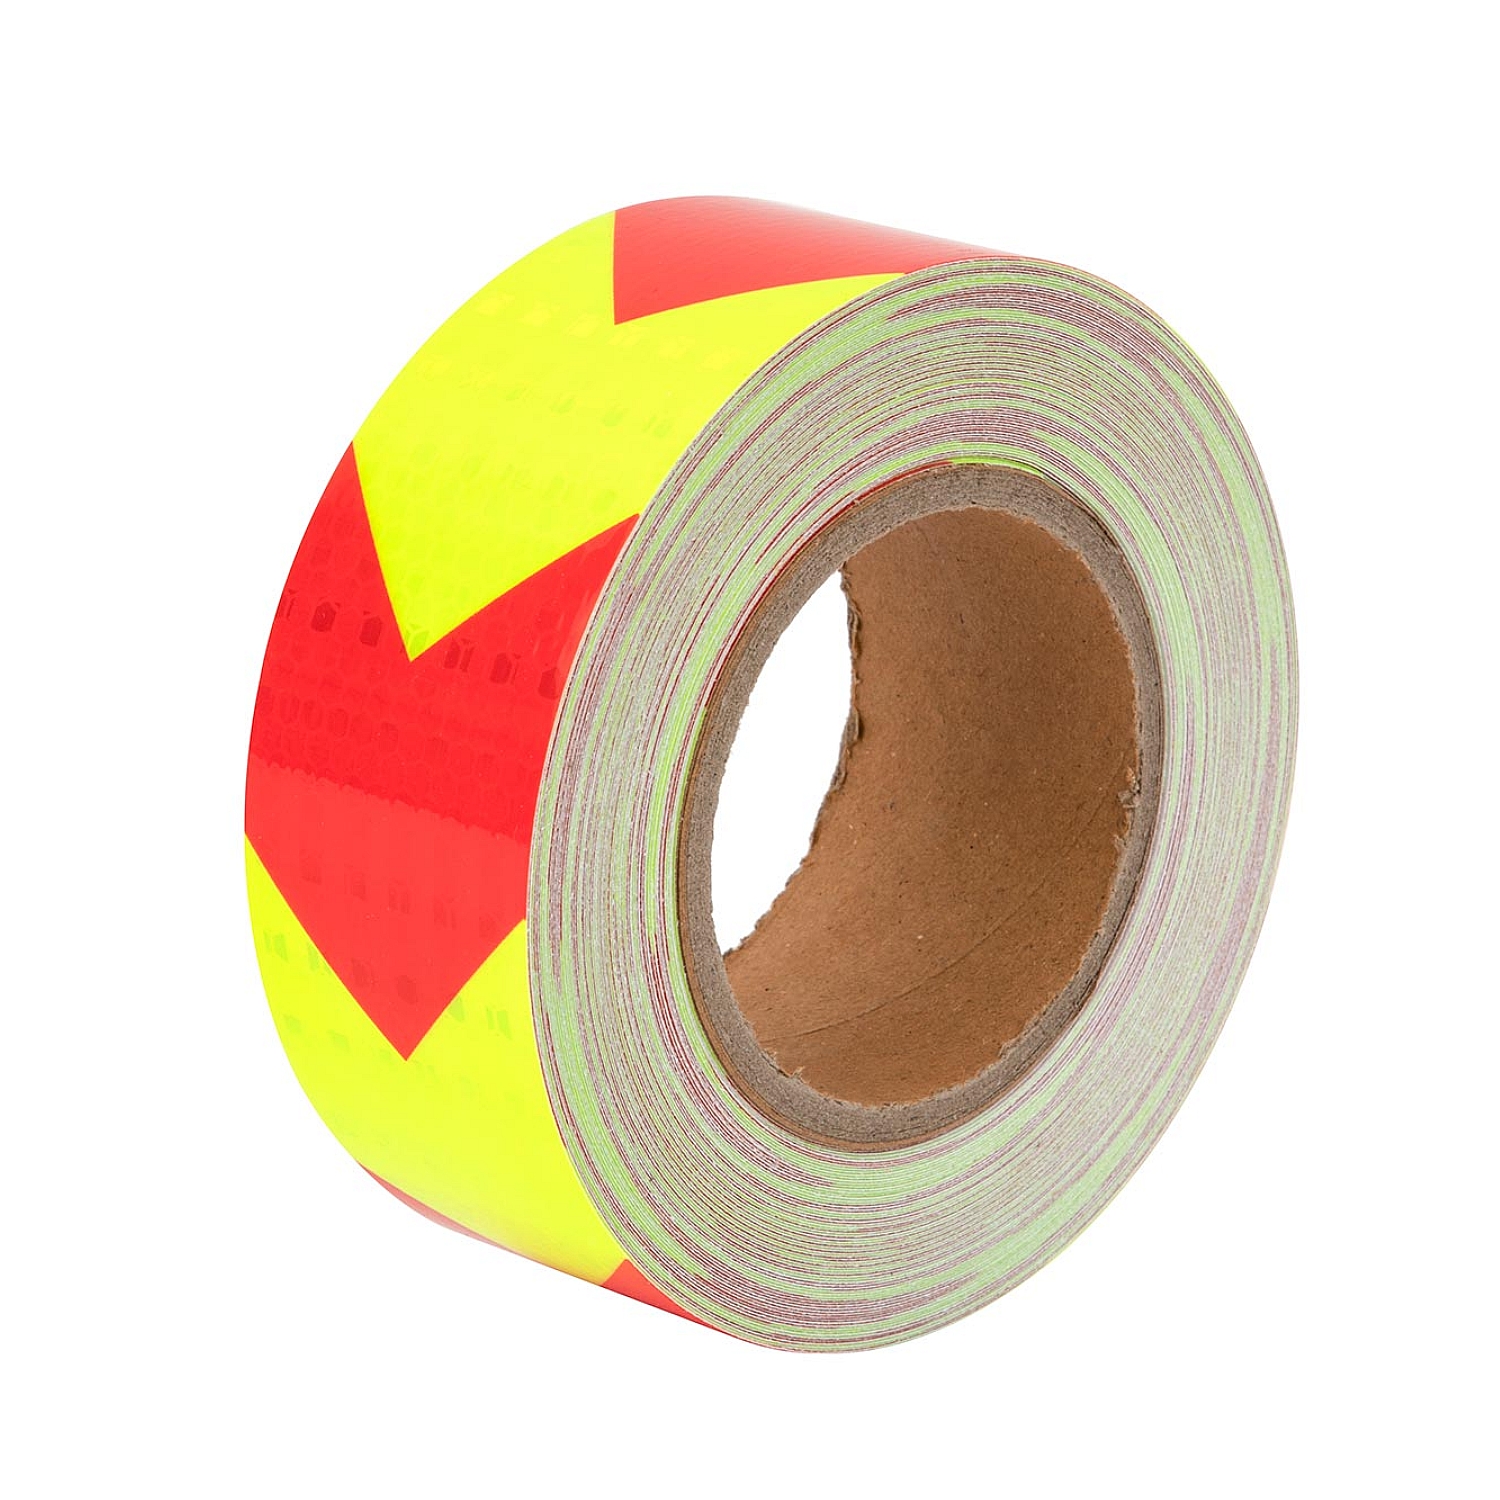 High Visibility Waterproof Adhesive PVC Arrow Reflective Safety Warning Tape 